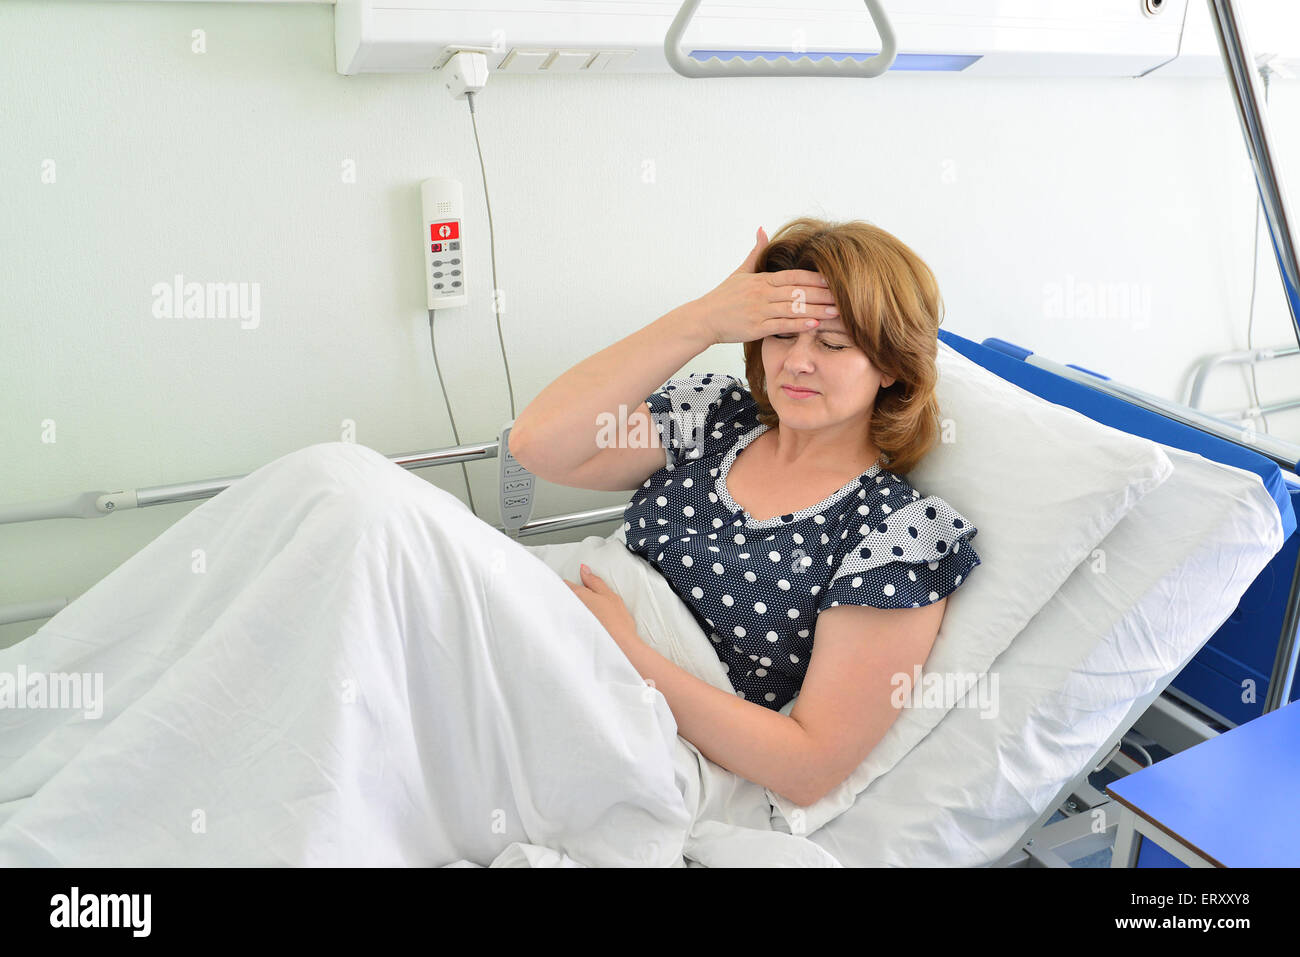 Female patient with headache on a bed in hospital ward Stock Photo